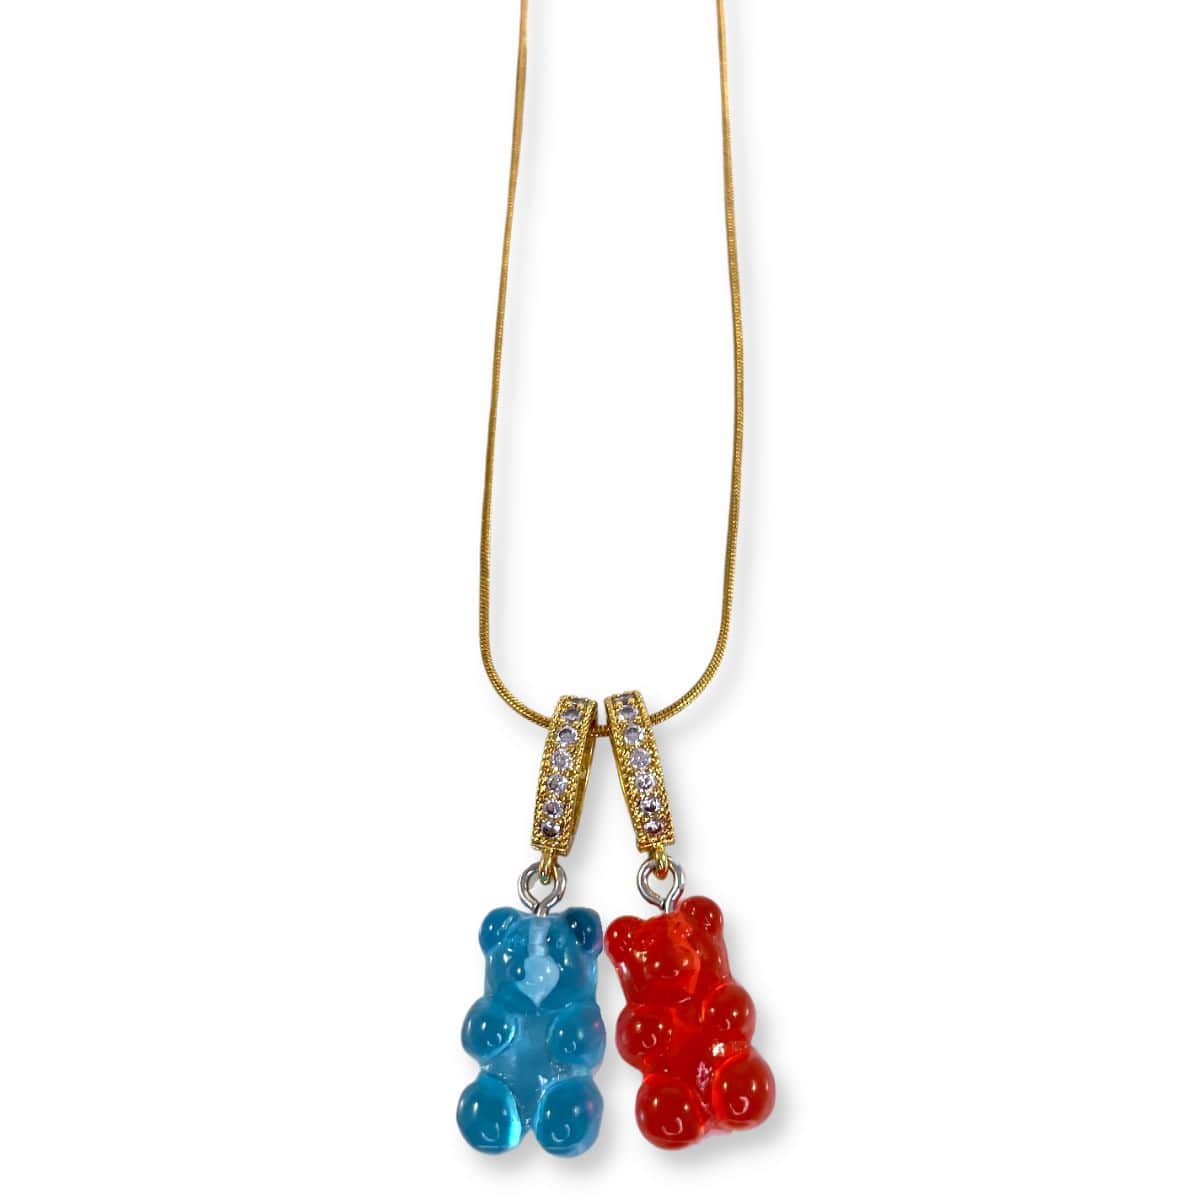 Cherries & Berries Mixed Double Bear Necklace - Gummy Bear Bling